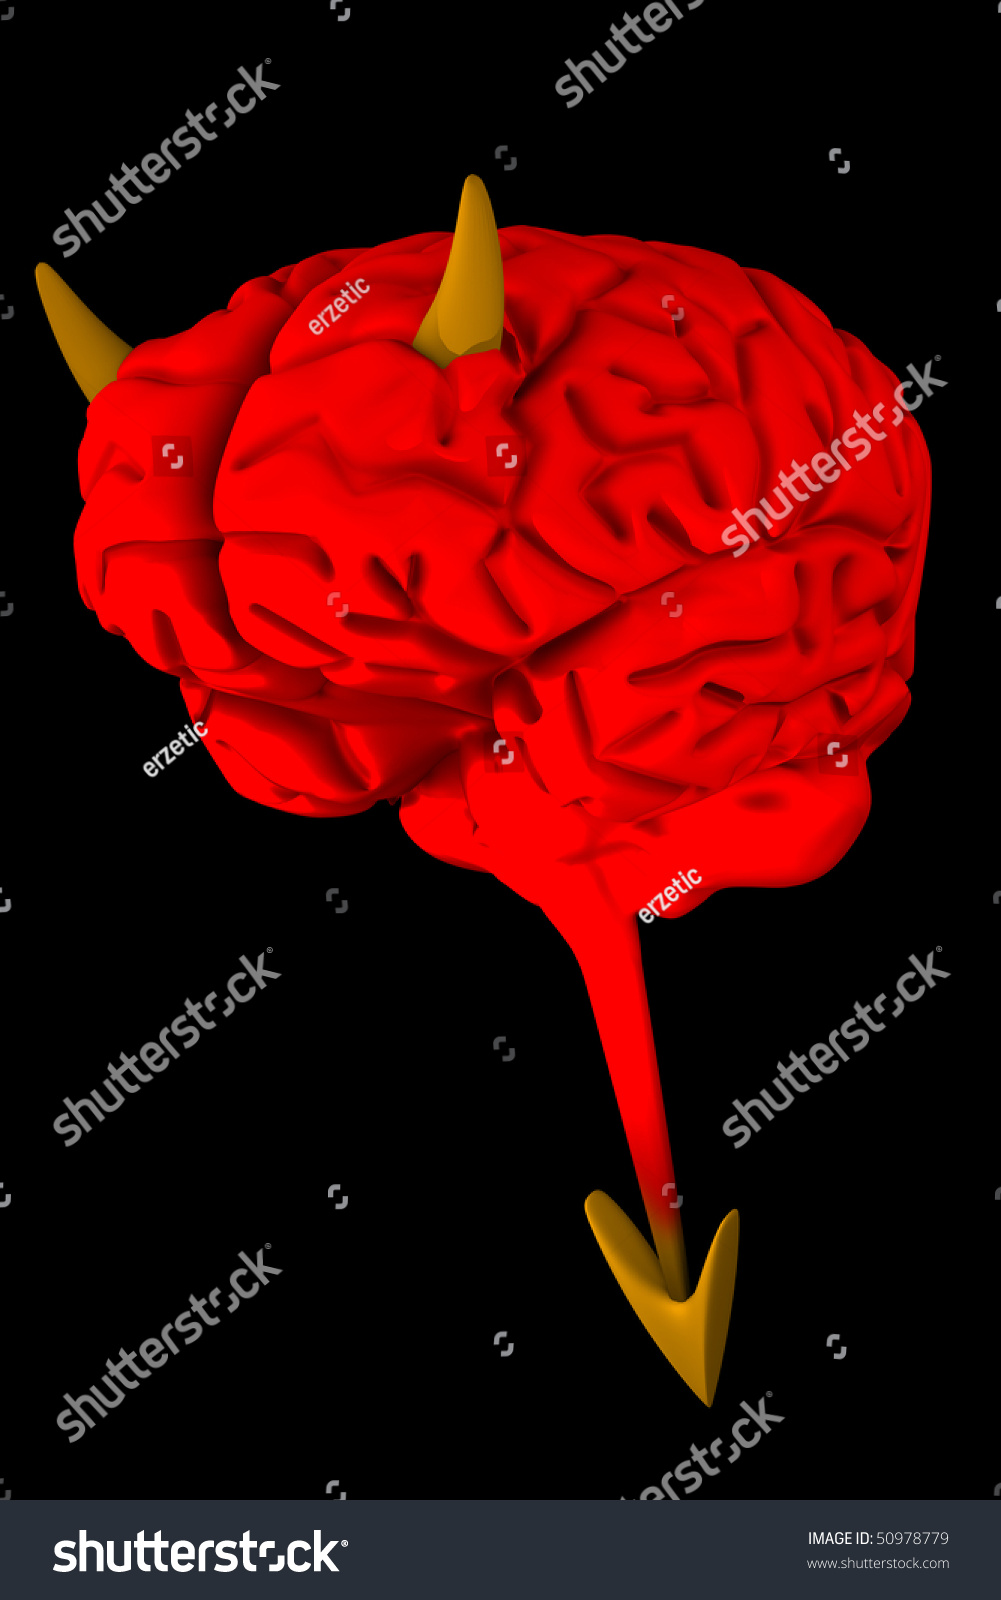 Red Devil Like Brain Isolated On Black Background Stock ...